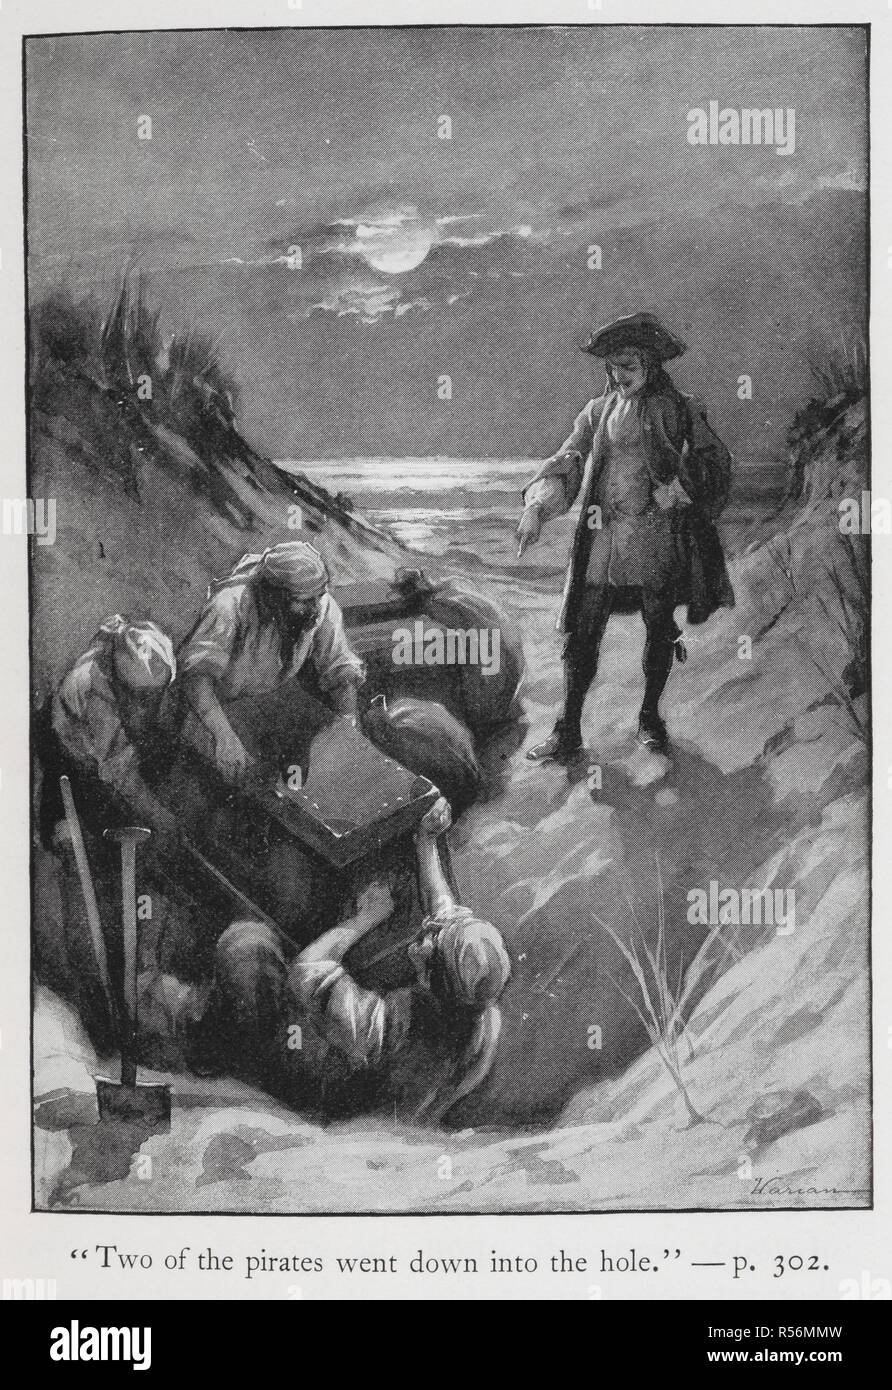 'Two of the pirates went down into the hole'. Illustration showing pirates burying treasure under the direction of their captain. Buccaneers and Pirates of our Coasts ... New York, 1898. Source: 9770.aa.8, page 302. Author: Stockton, Frank Richard. Varian, G. Stock Photo